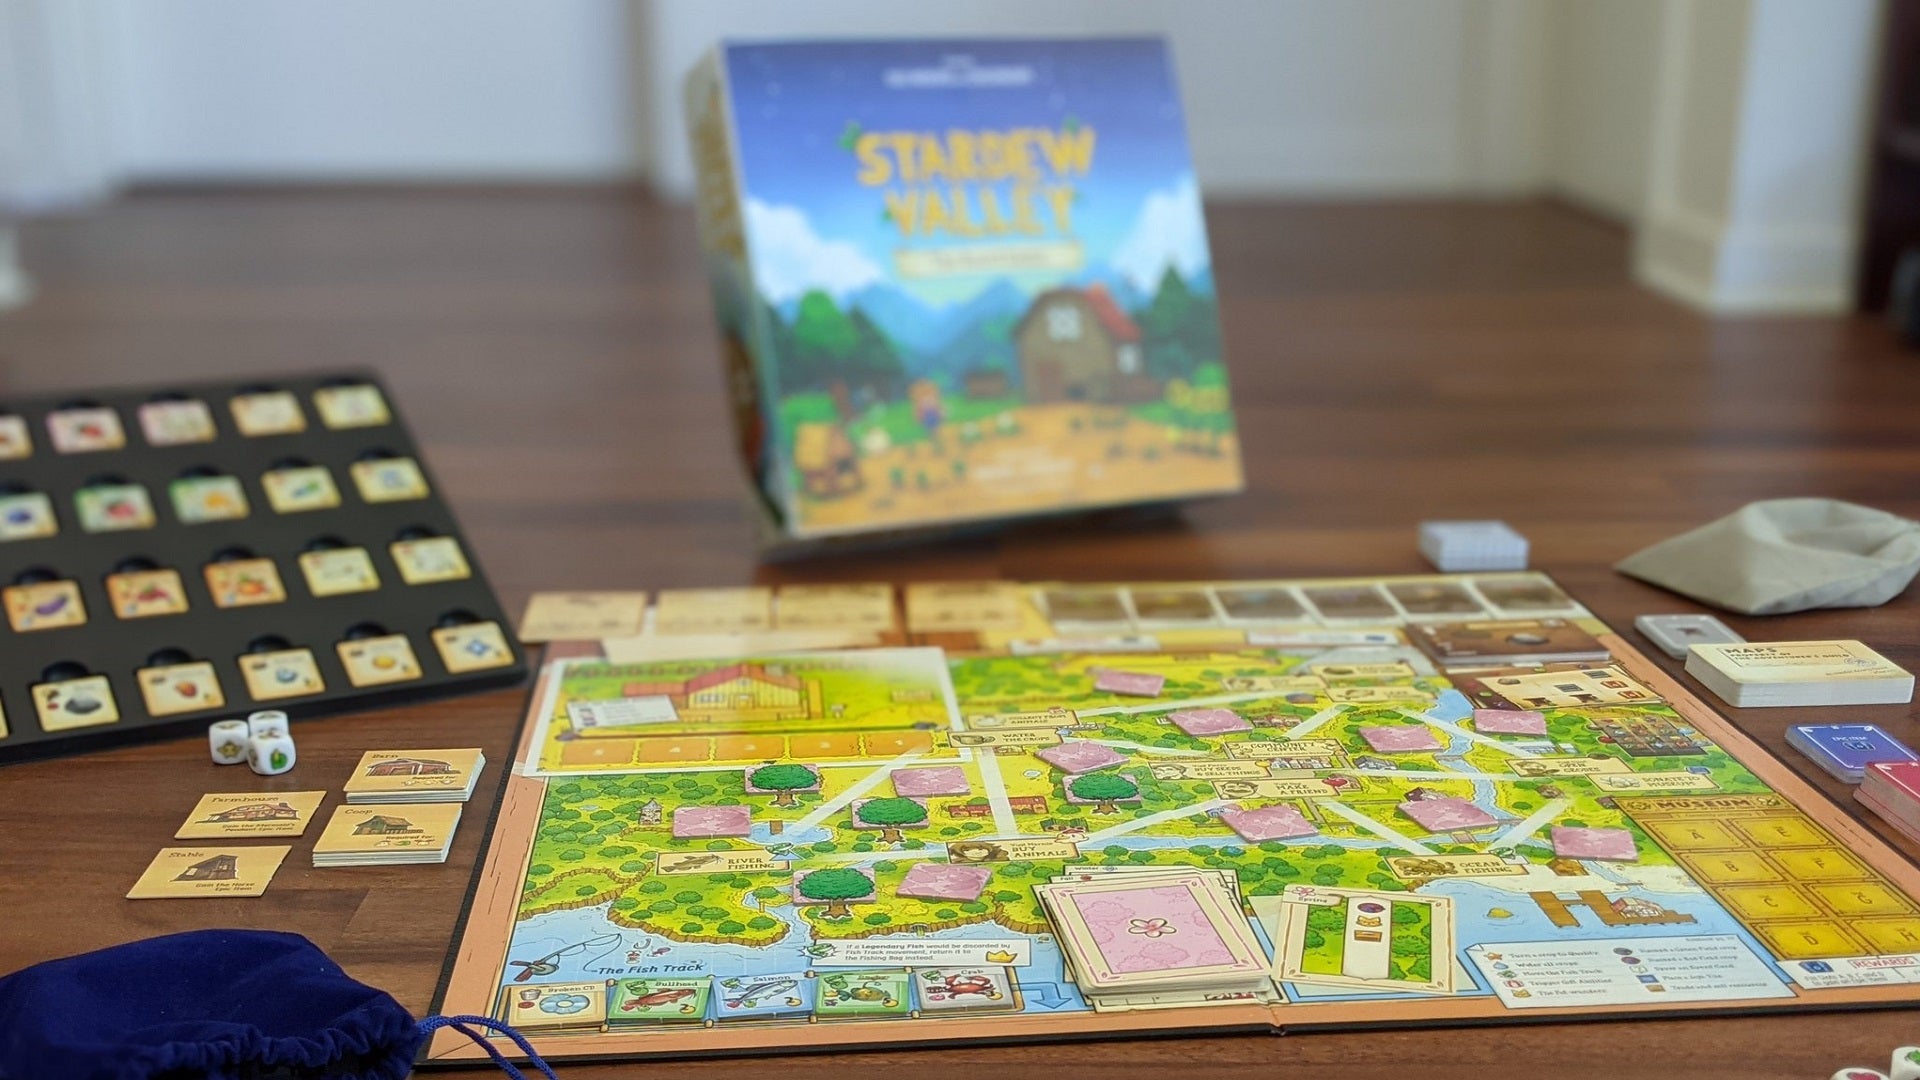 Stardew Valley has a board game now